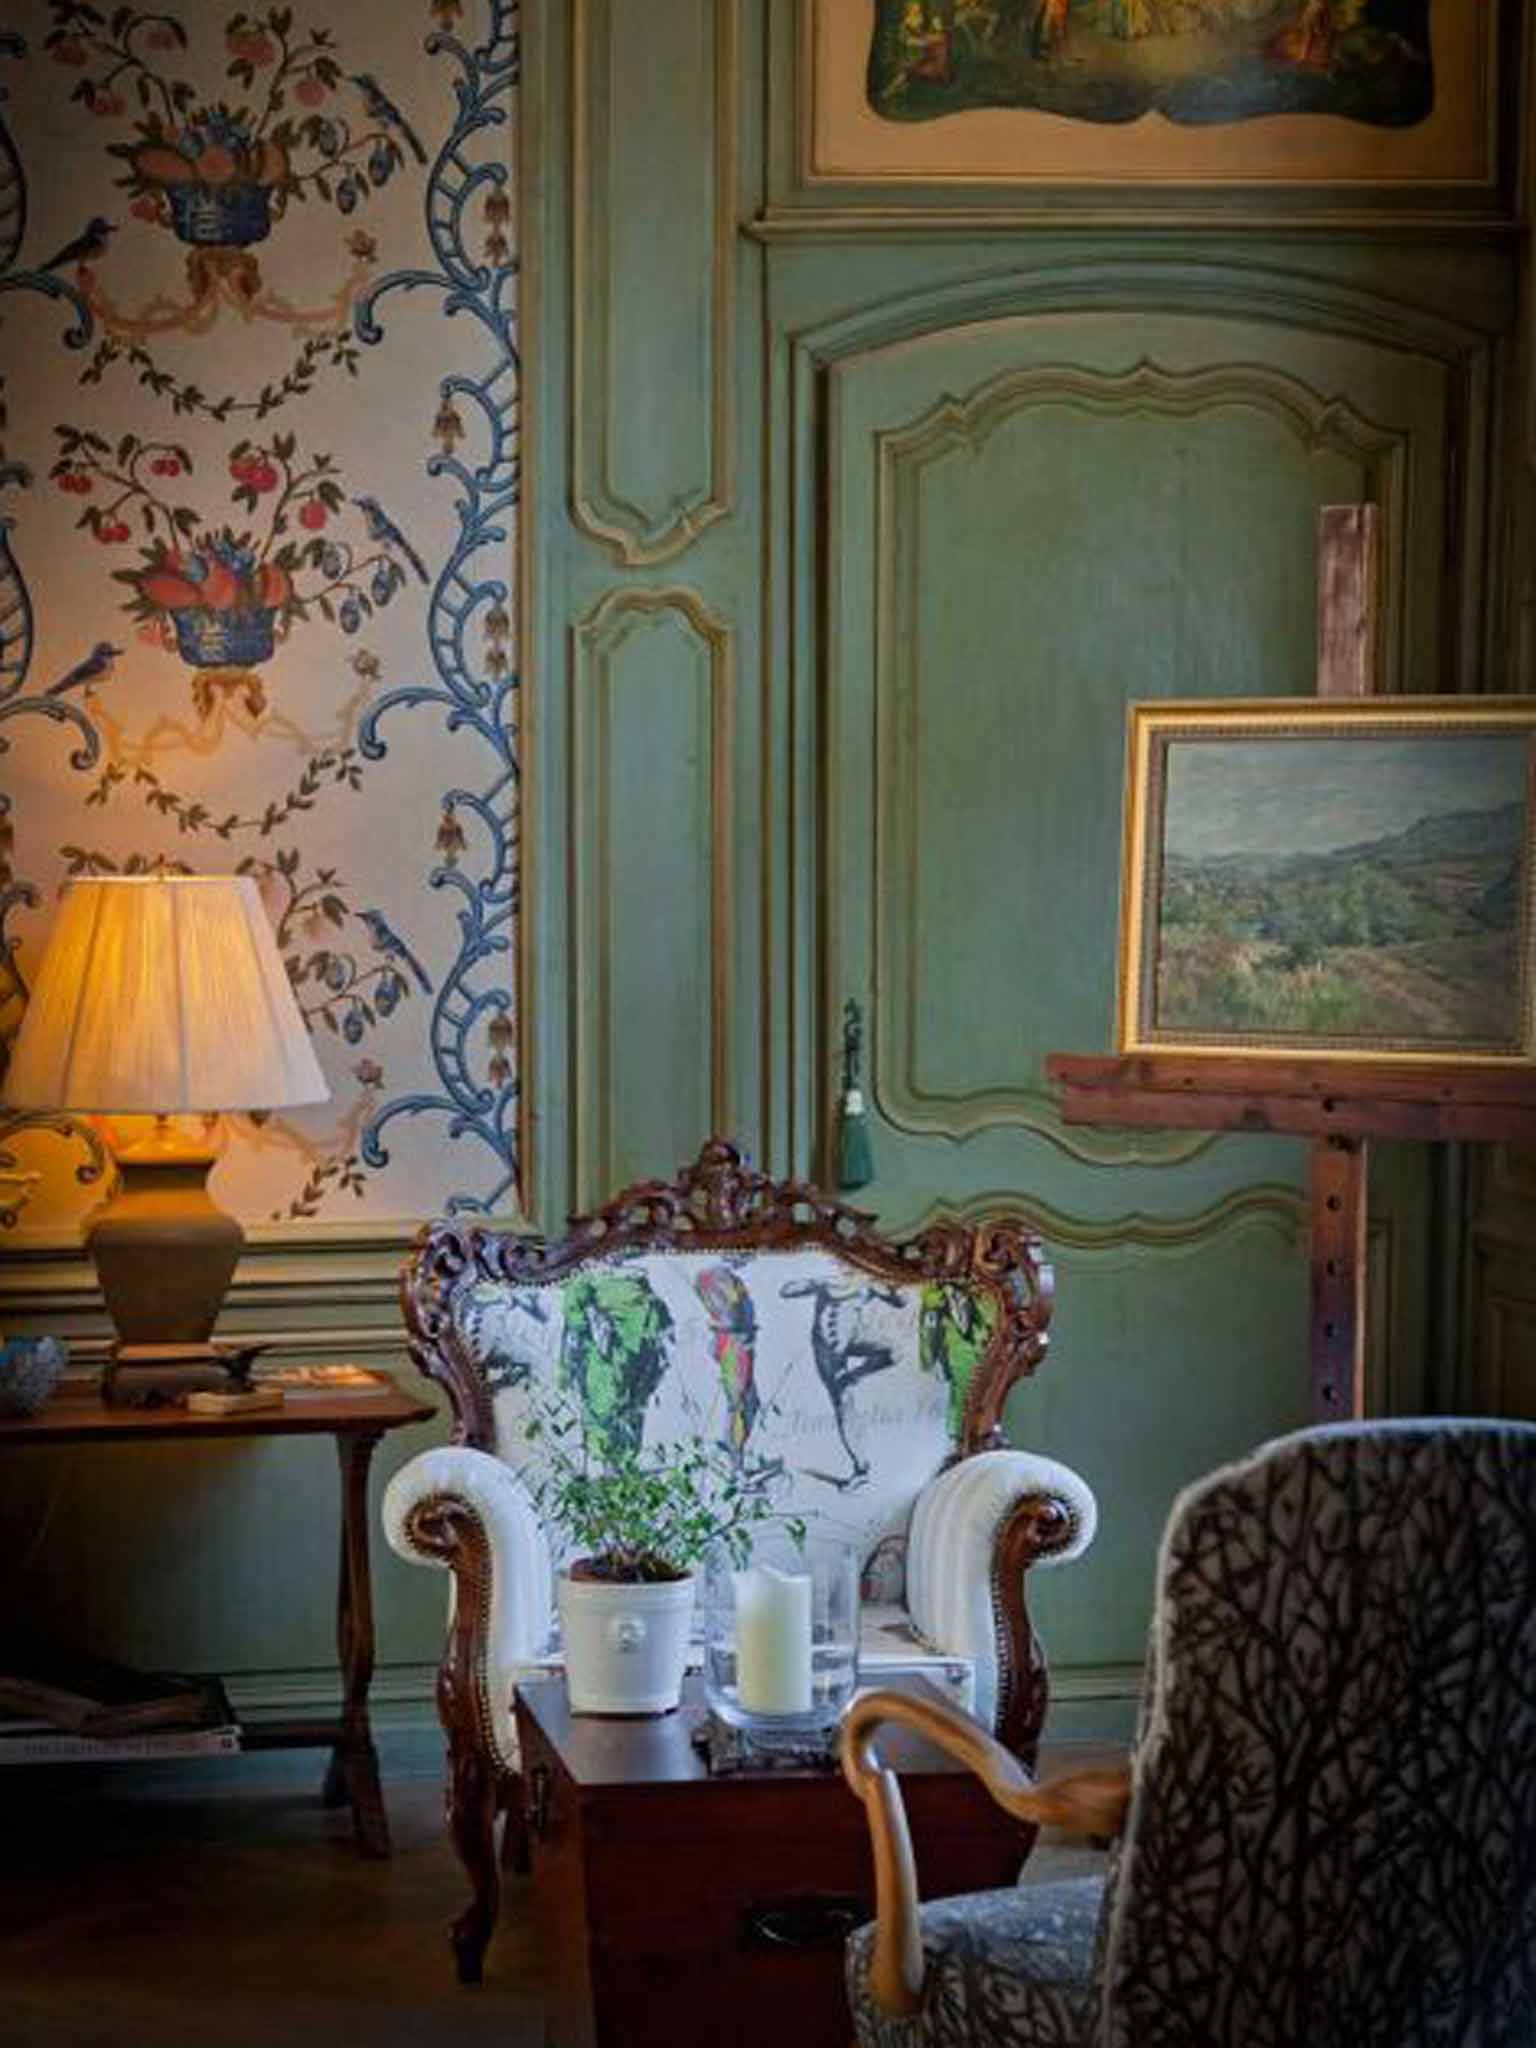 Labour of love: The restored drawing room